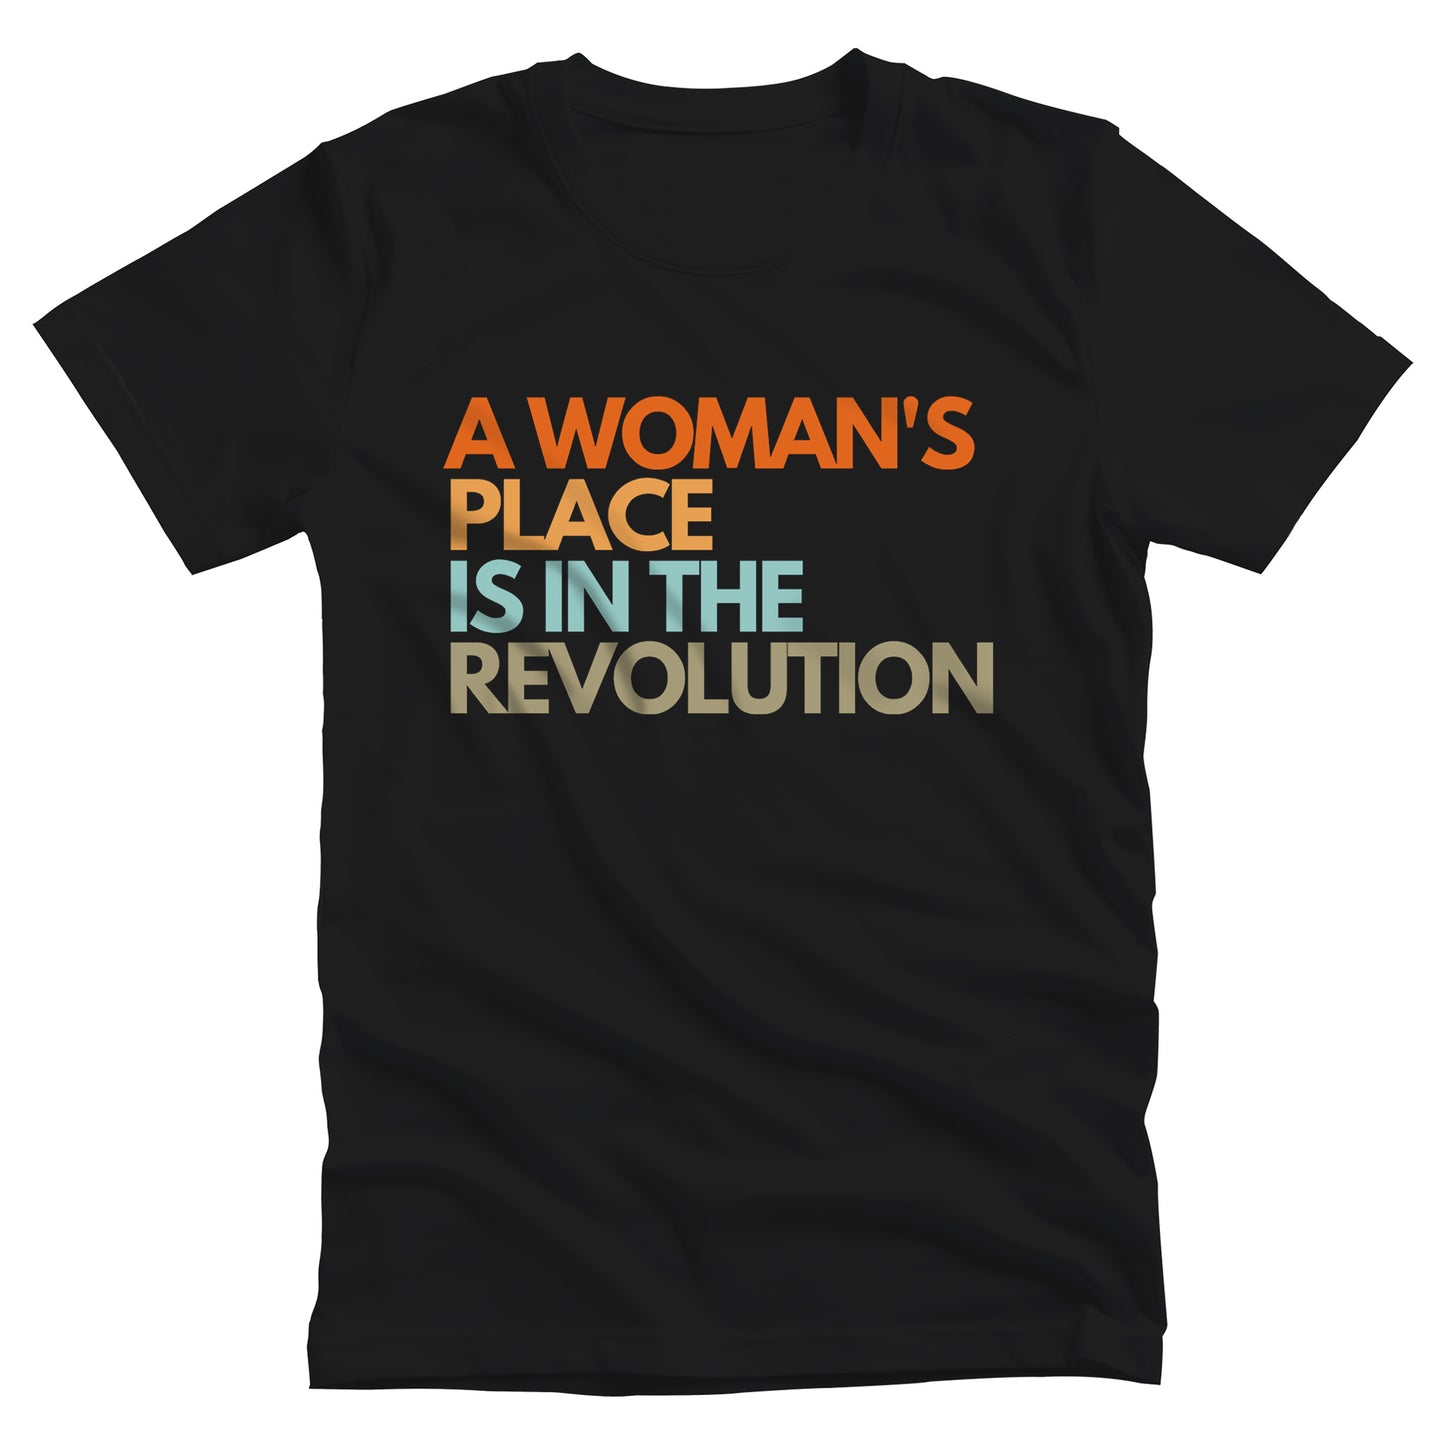 Black unisex t-shirt that says “A woman’s place is in the revolution” in a round, modern font in all caps and left aligned. Each line is a different color. “A Woman’s” is orange, “place” is yellow-orange, “is in the” is light blue, and “revolution” is military green.